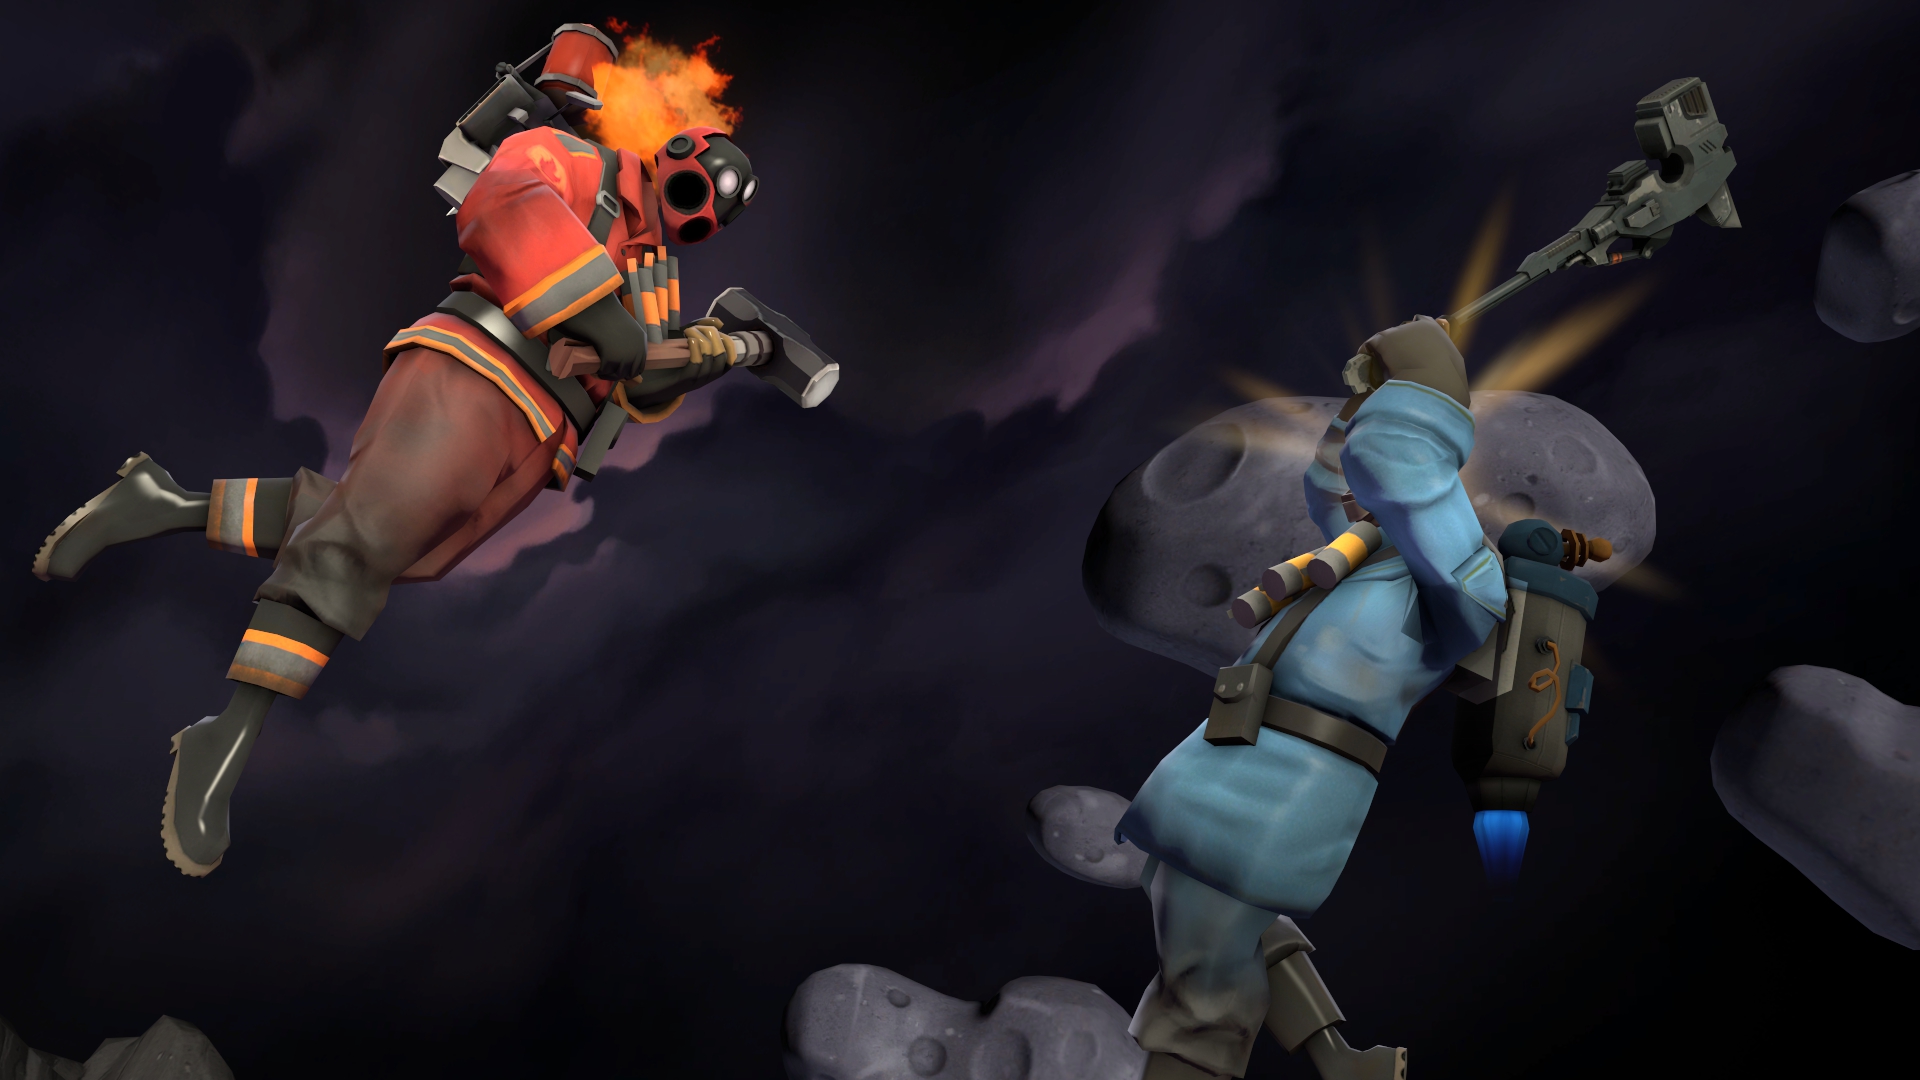 Pyro Team Fortress Space Team Fortress 2 1920x1080